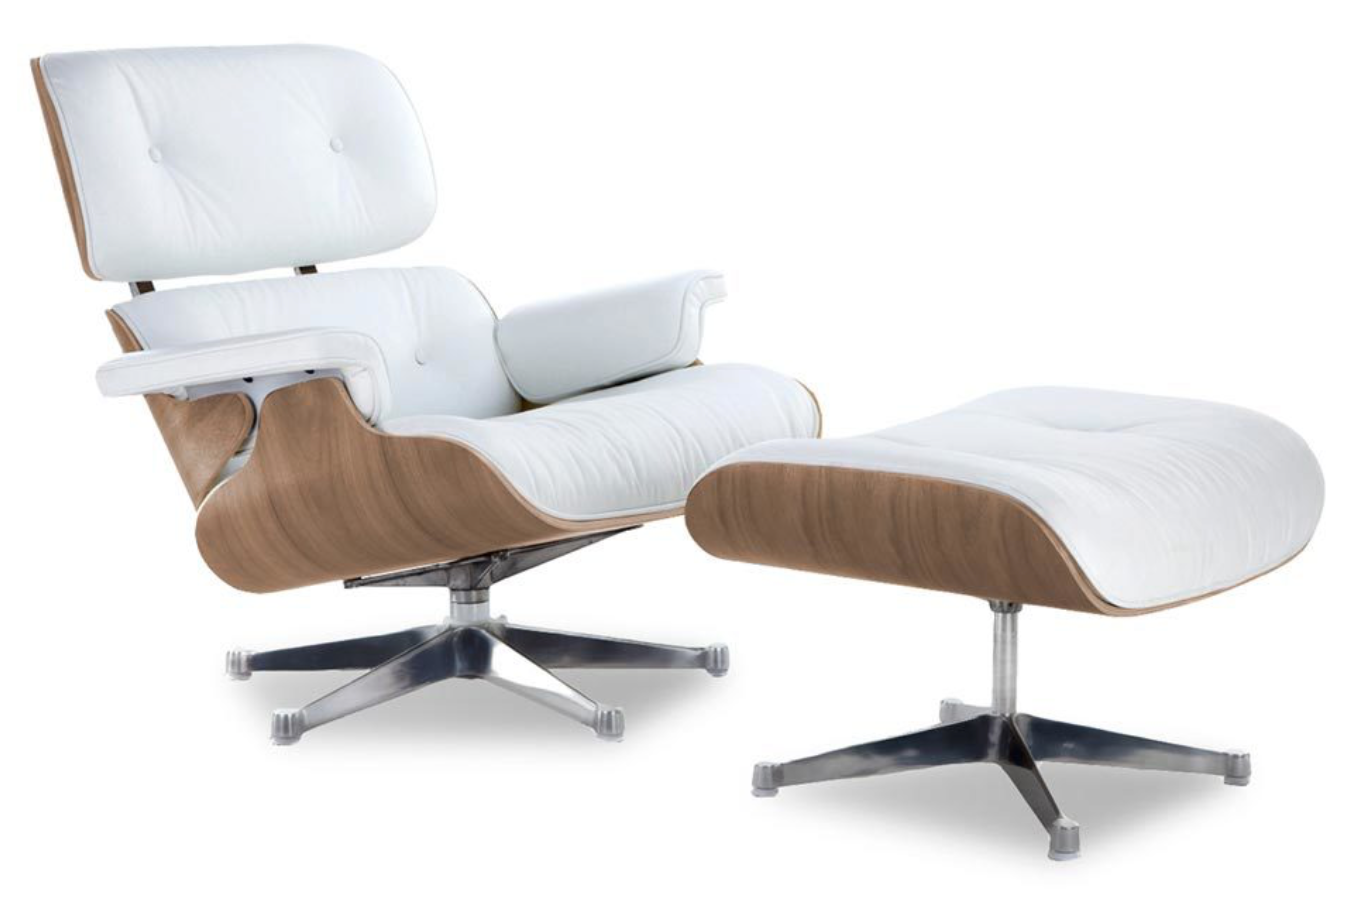 Eames Lounge Chair Replica Review: Manhattan Design Version by |